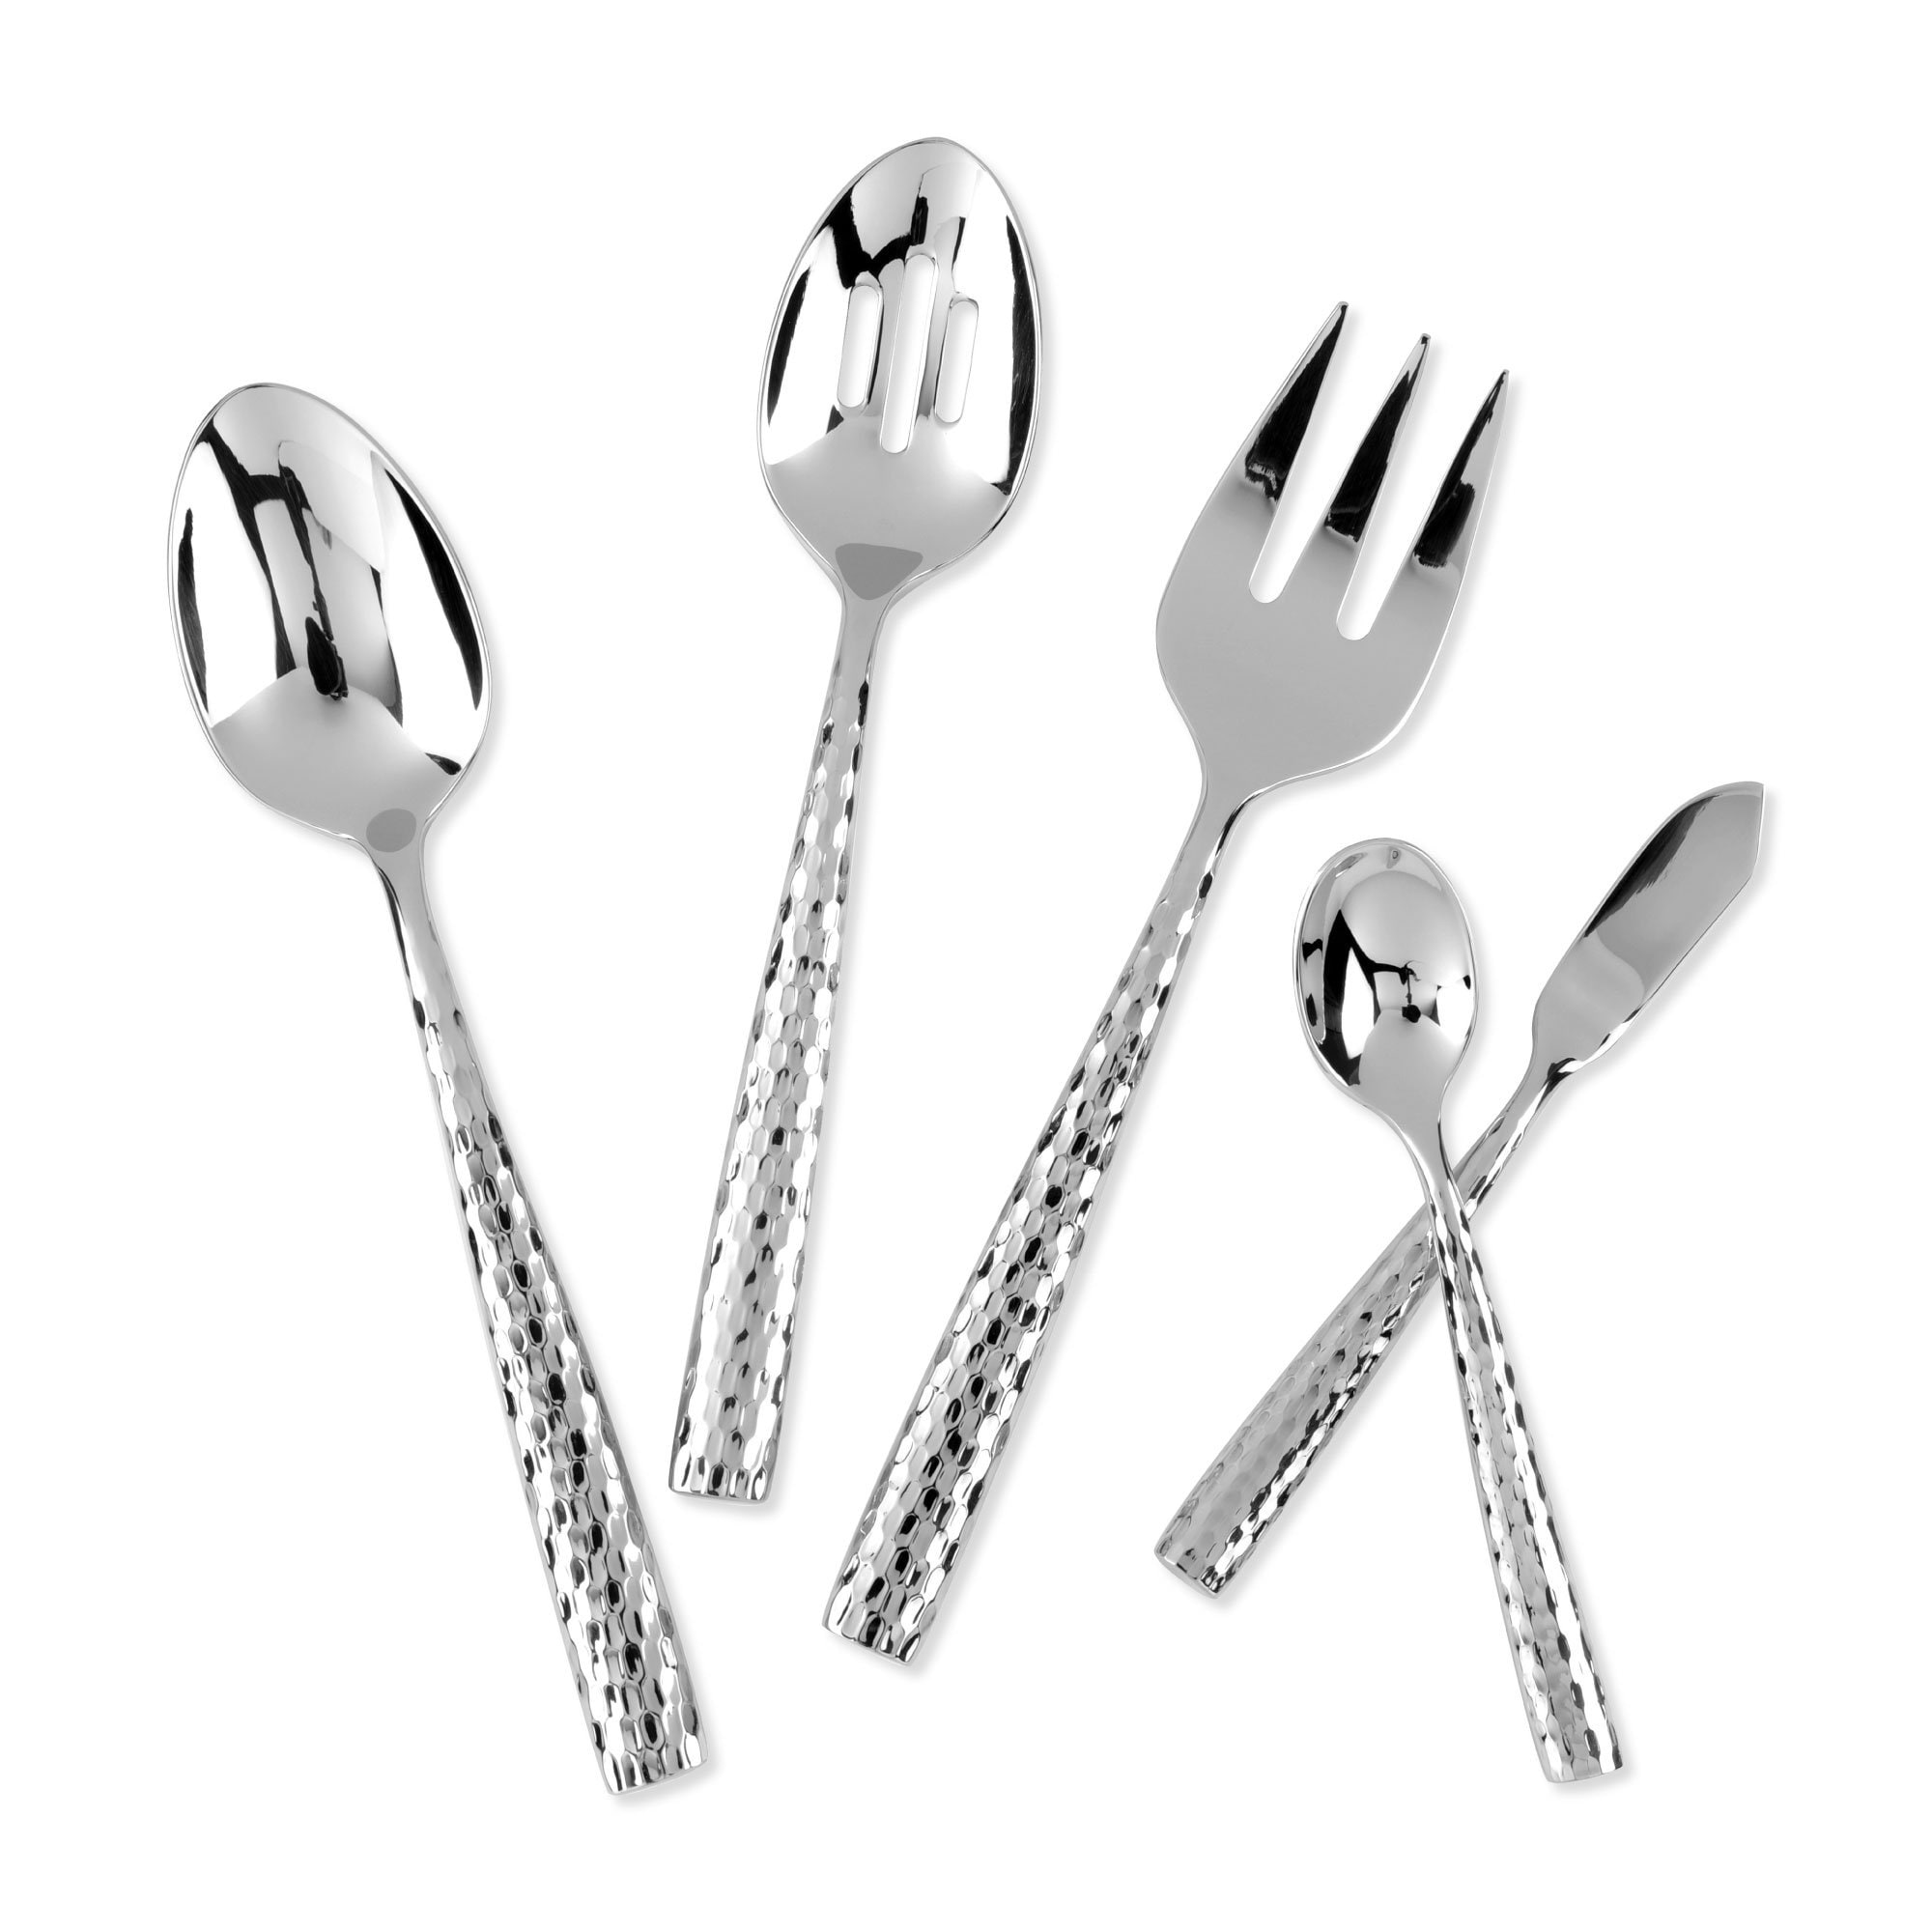 or 5 pc hostess set Choose spoons Mikasa Harmony Stainless Flatware knives 